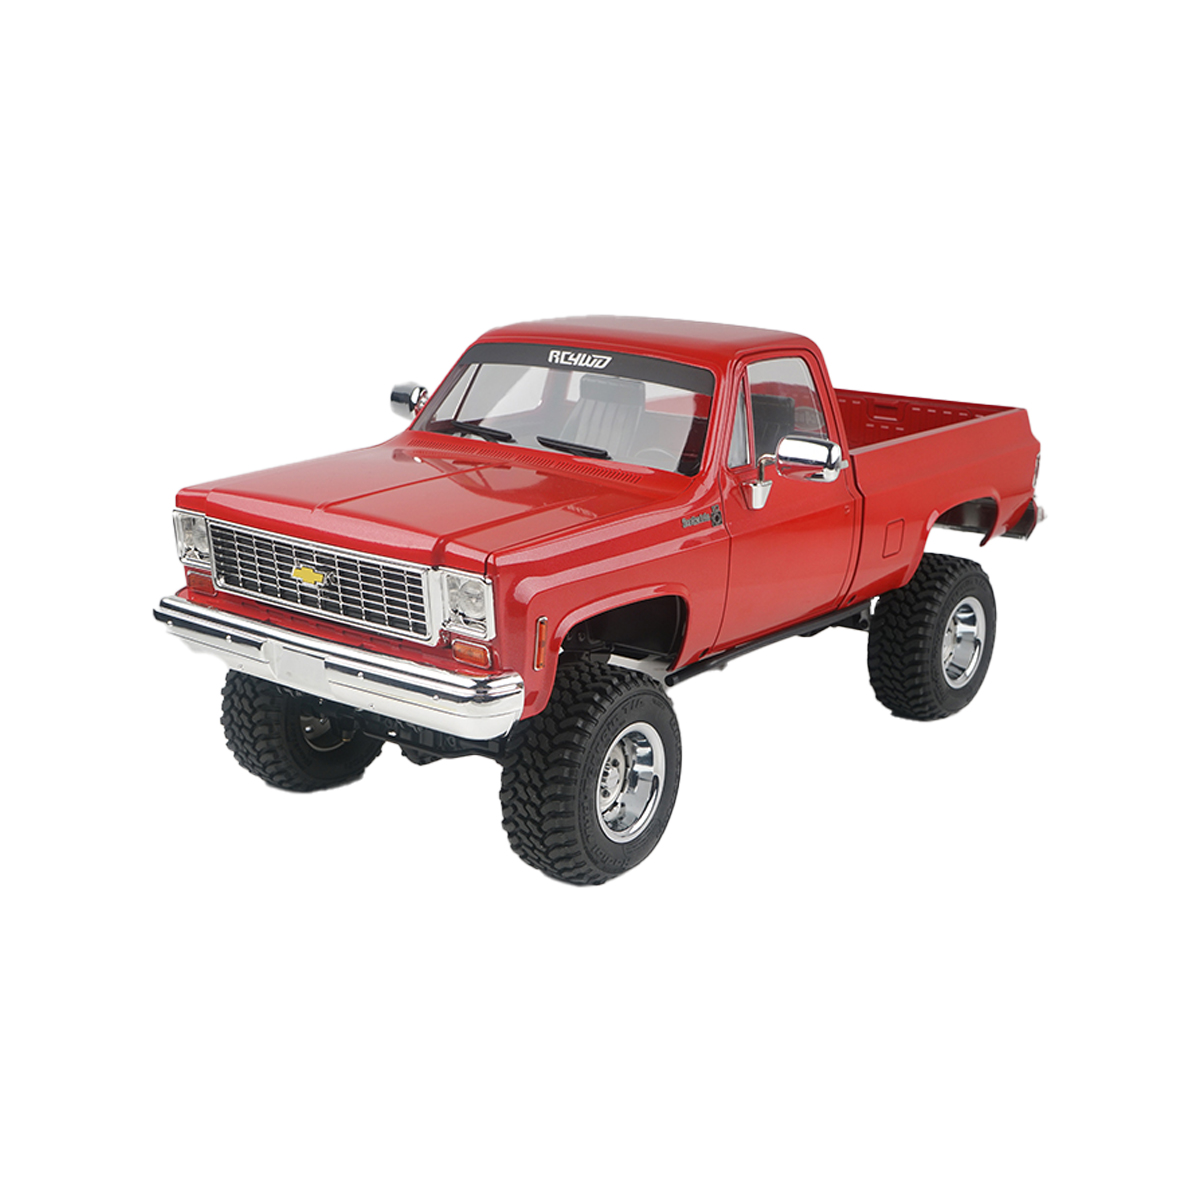 Picture of RC4WD RC4ZRTR0066 Trail Finder 2 LWB RTR with Chevrolet K10 Scottsdale Body RC Car